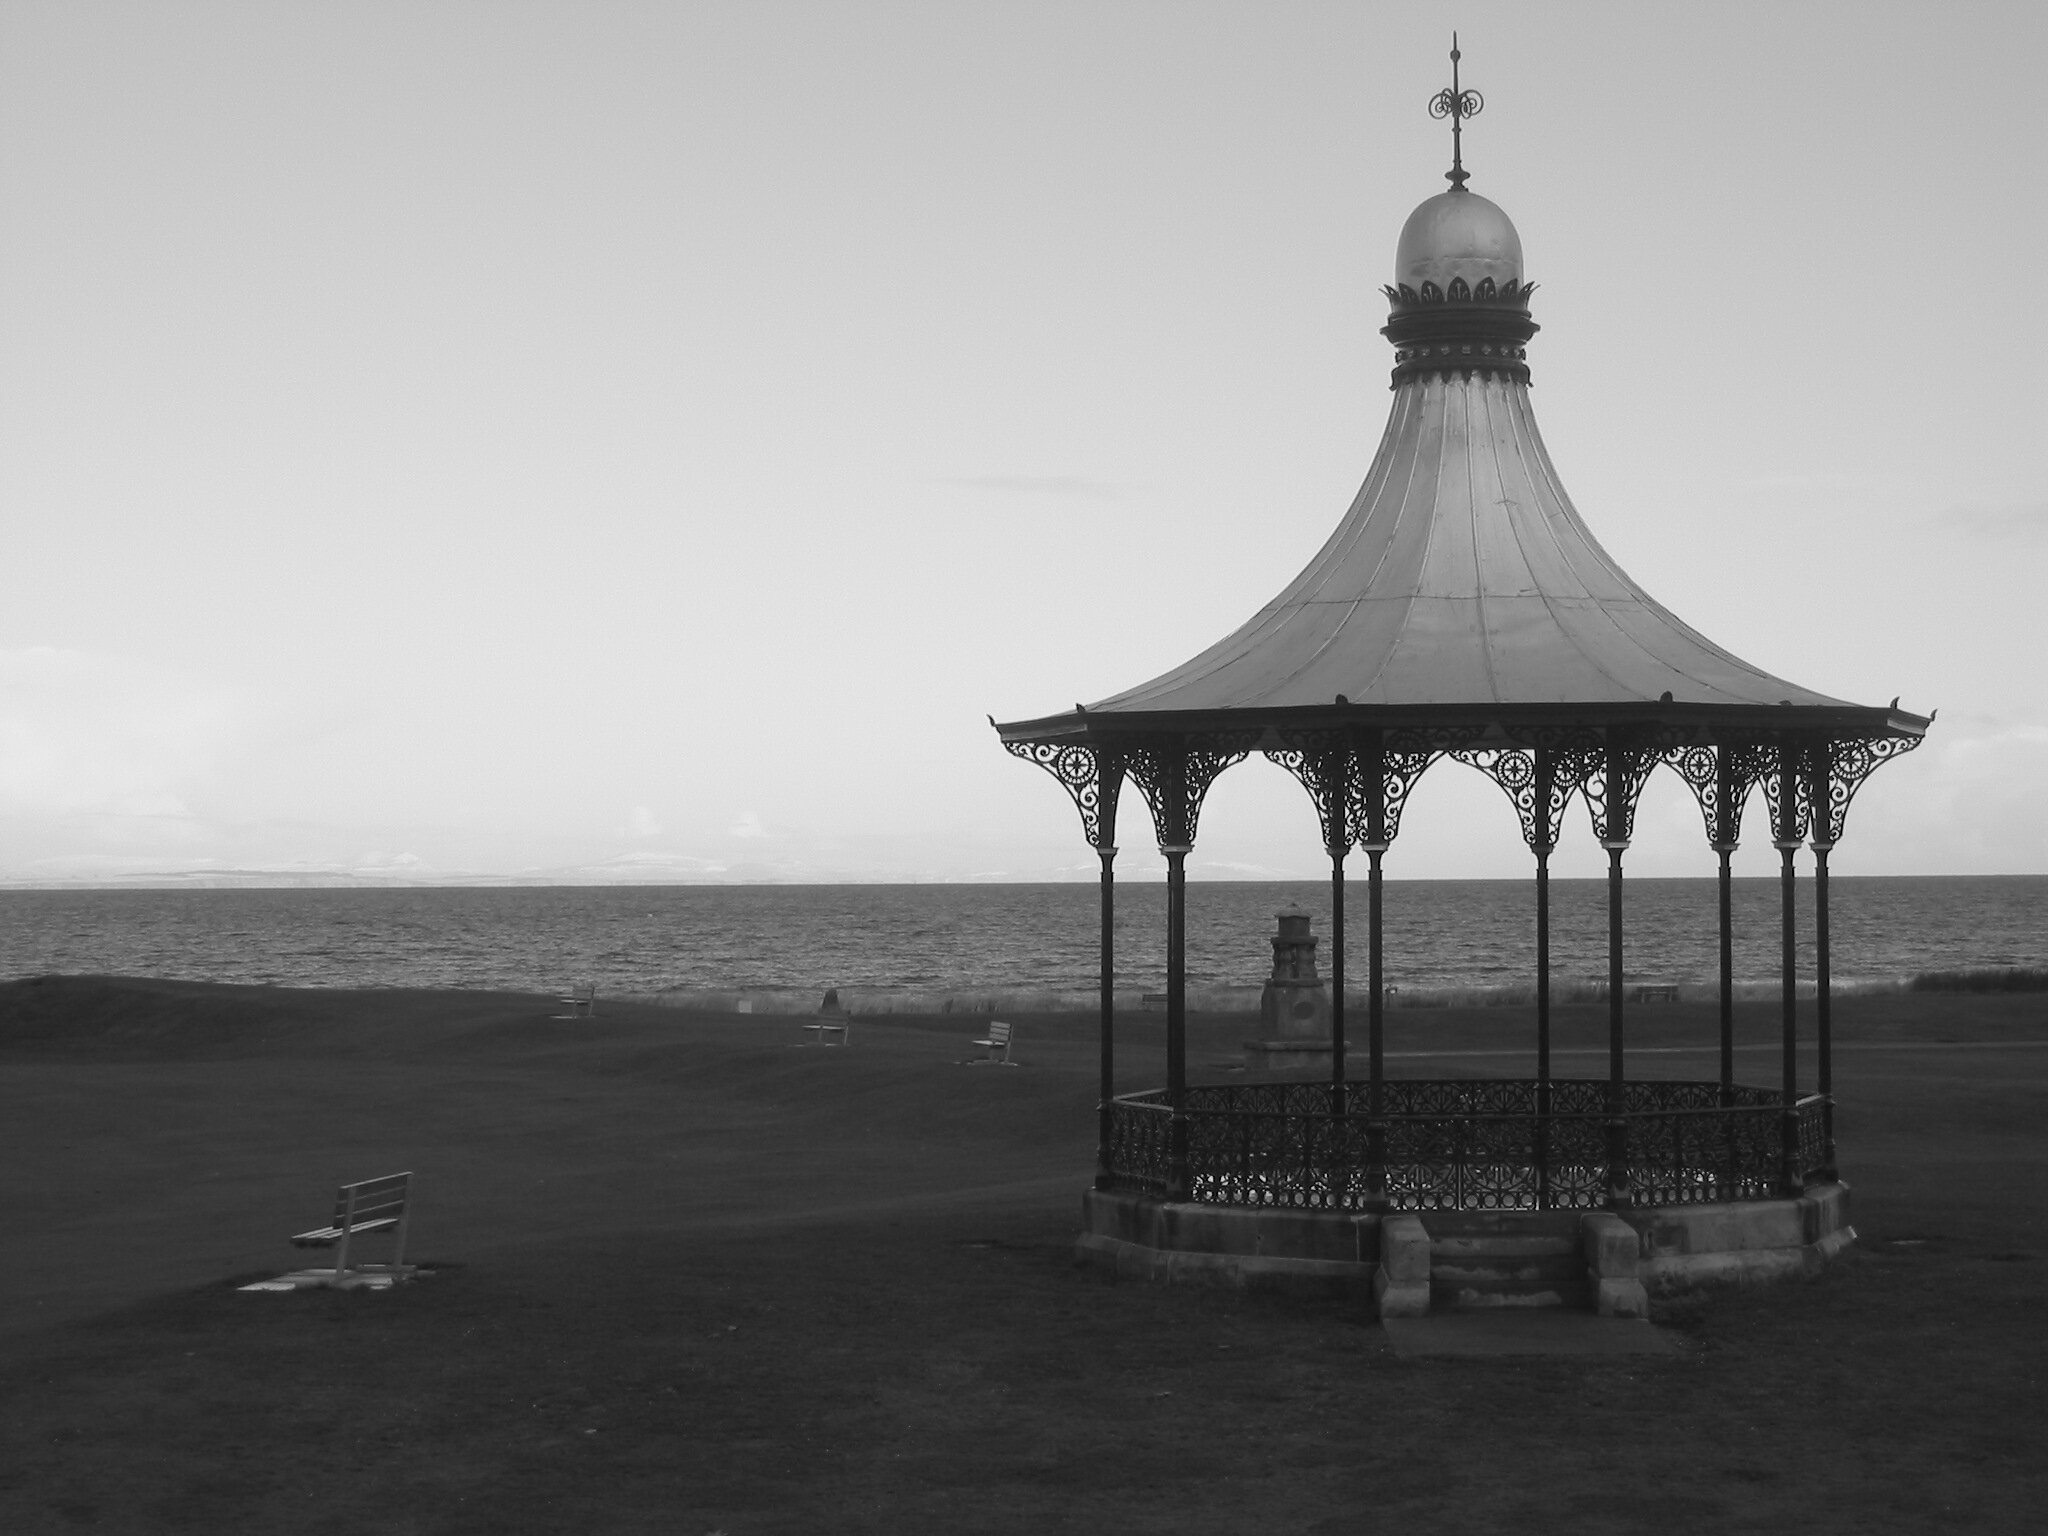 The Wallace Bandstand. Nairn, Scotland.